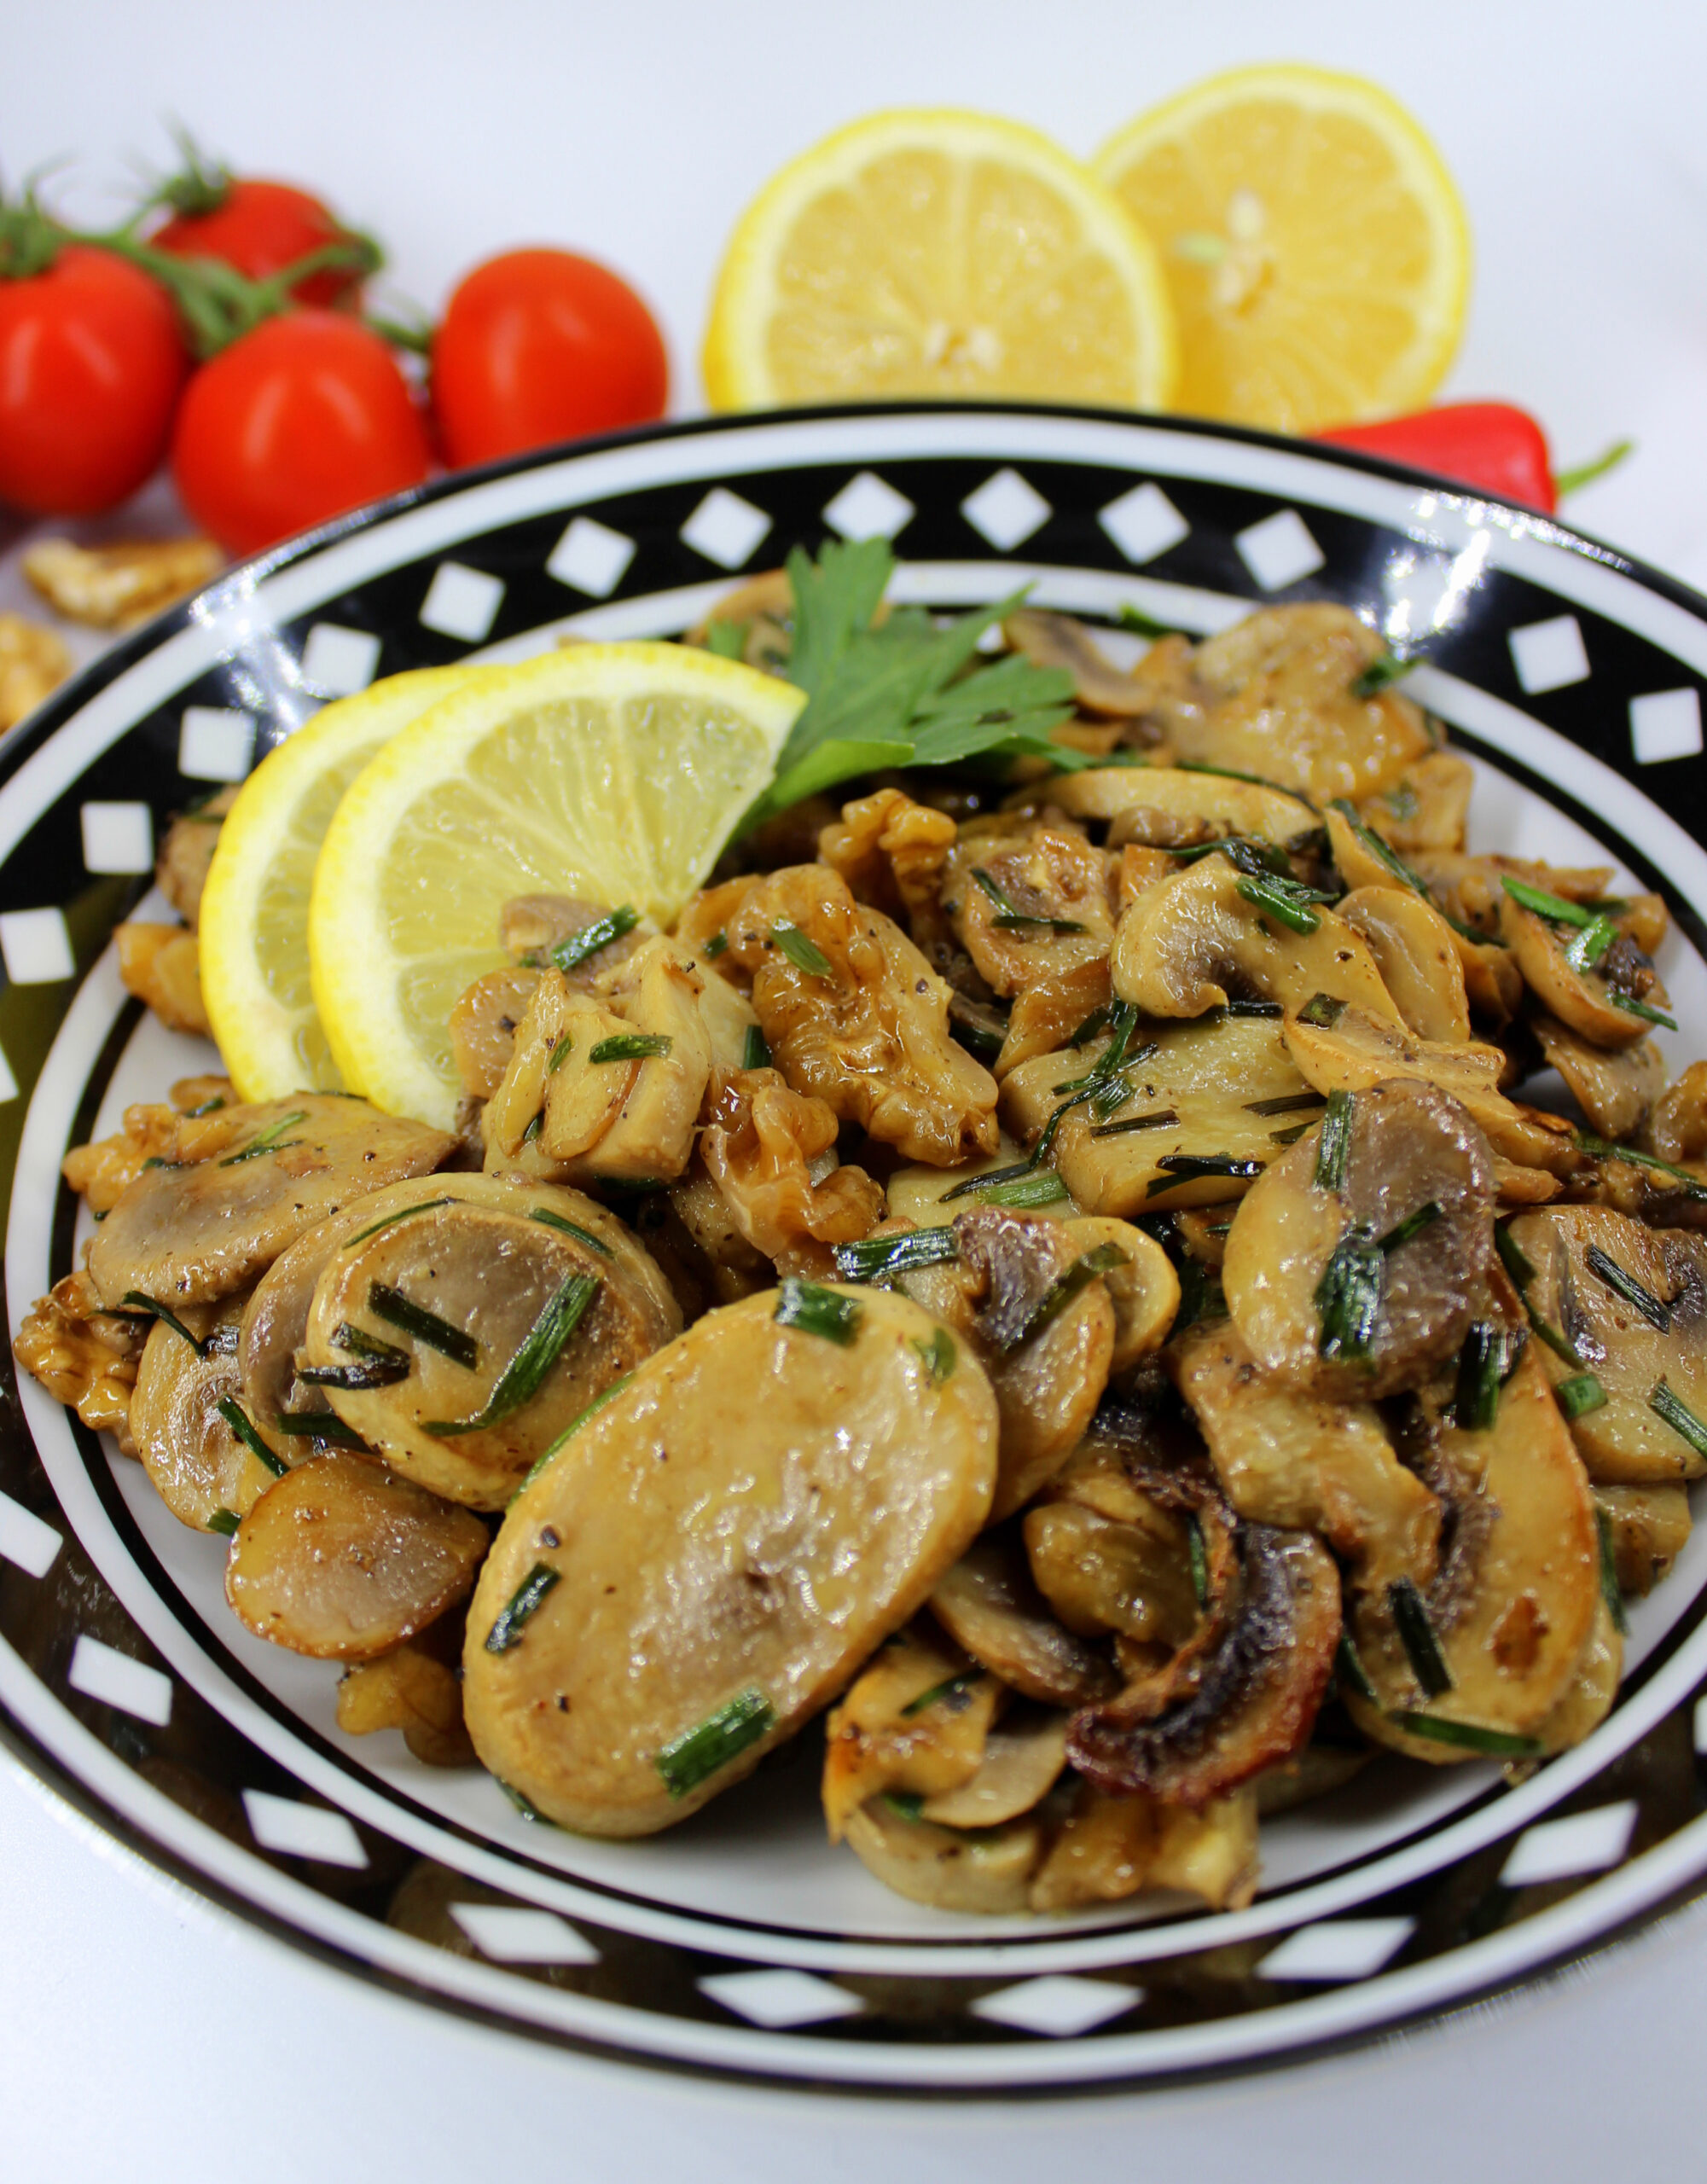 Plate of mushrooms with lemon and walnuts